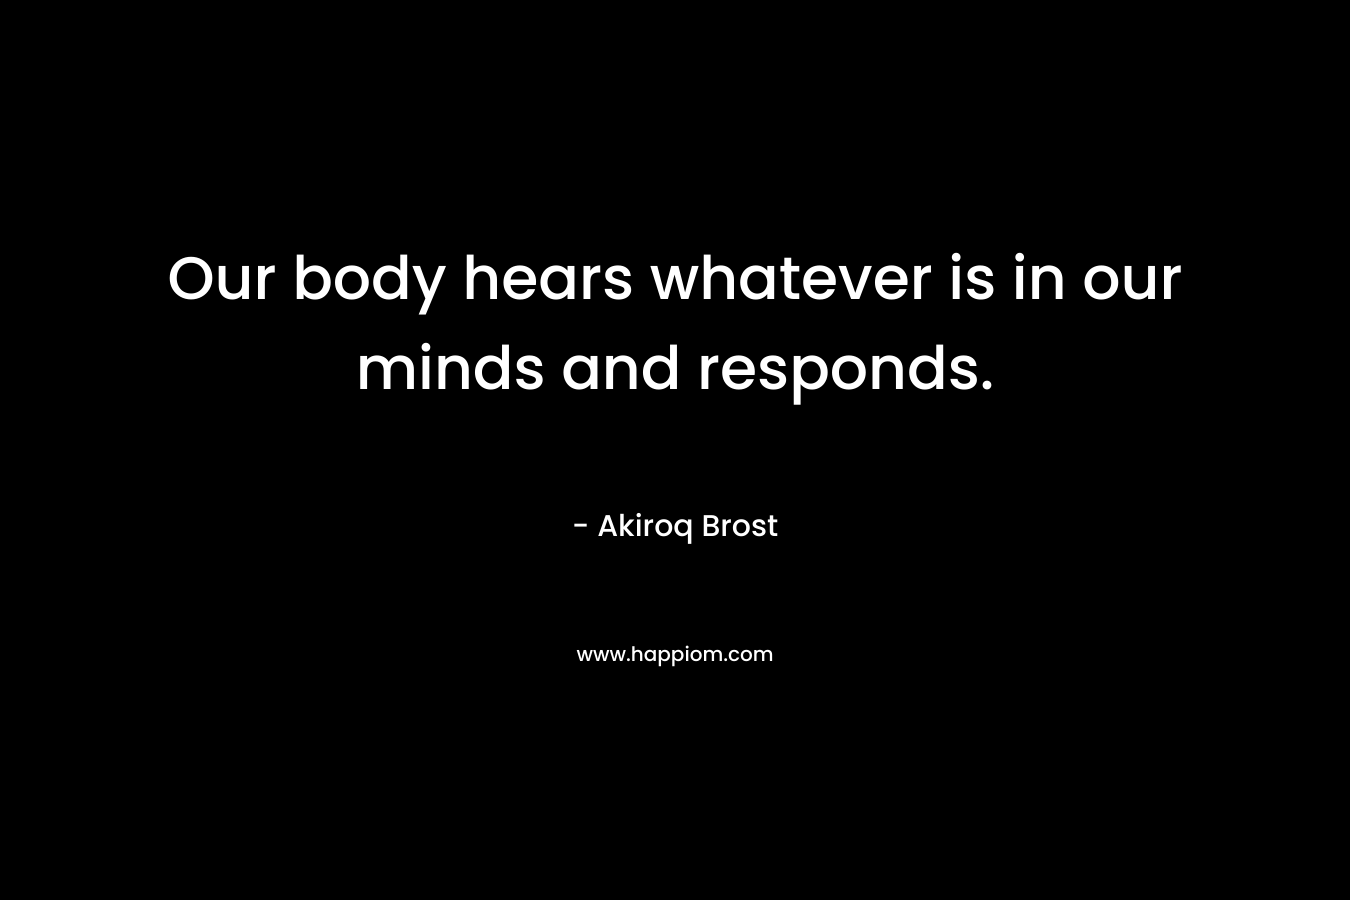 Our body hears whatever is in our minds and responds. – Akiroq Brost